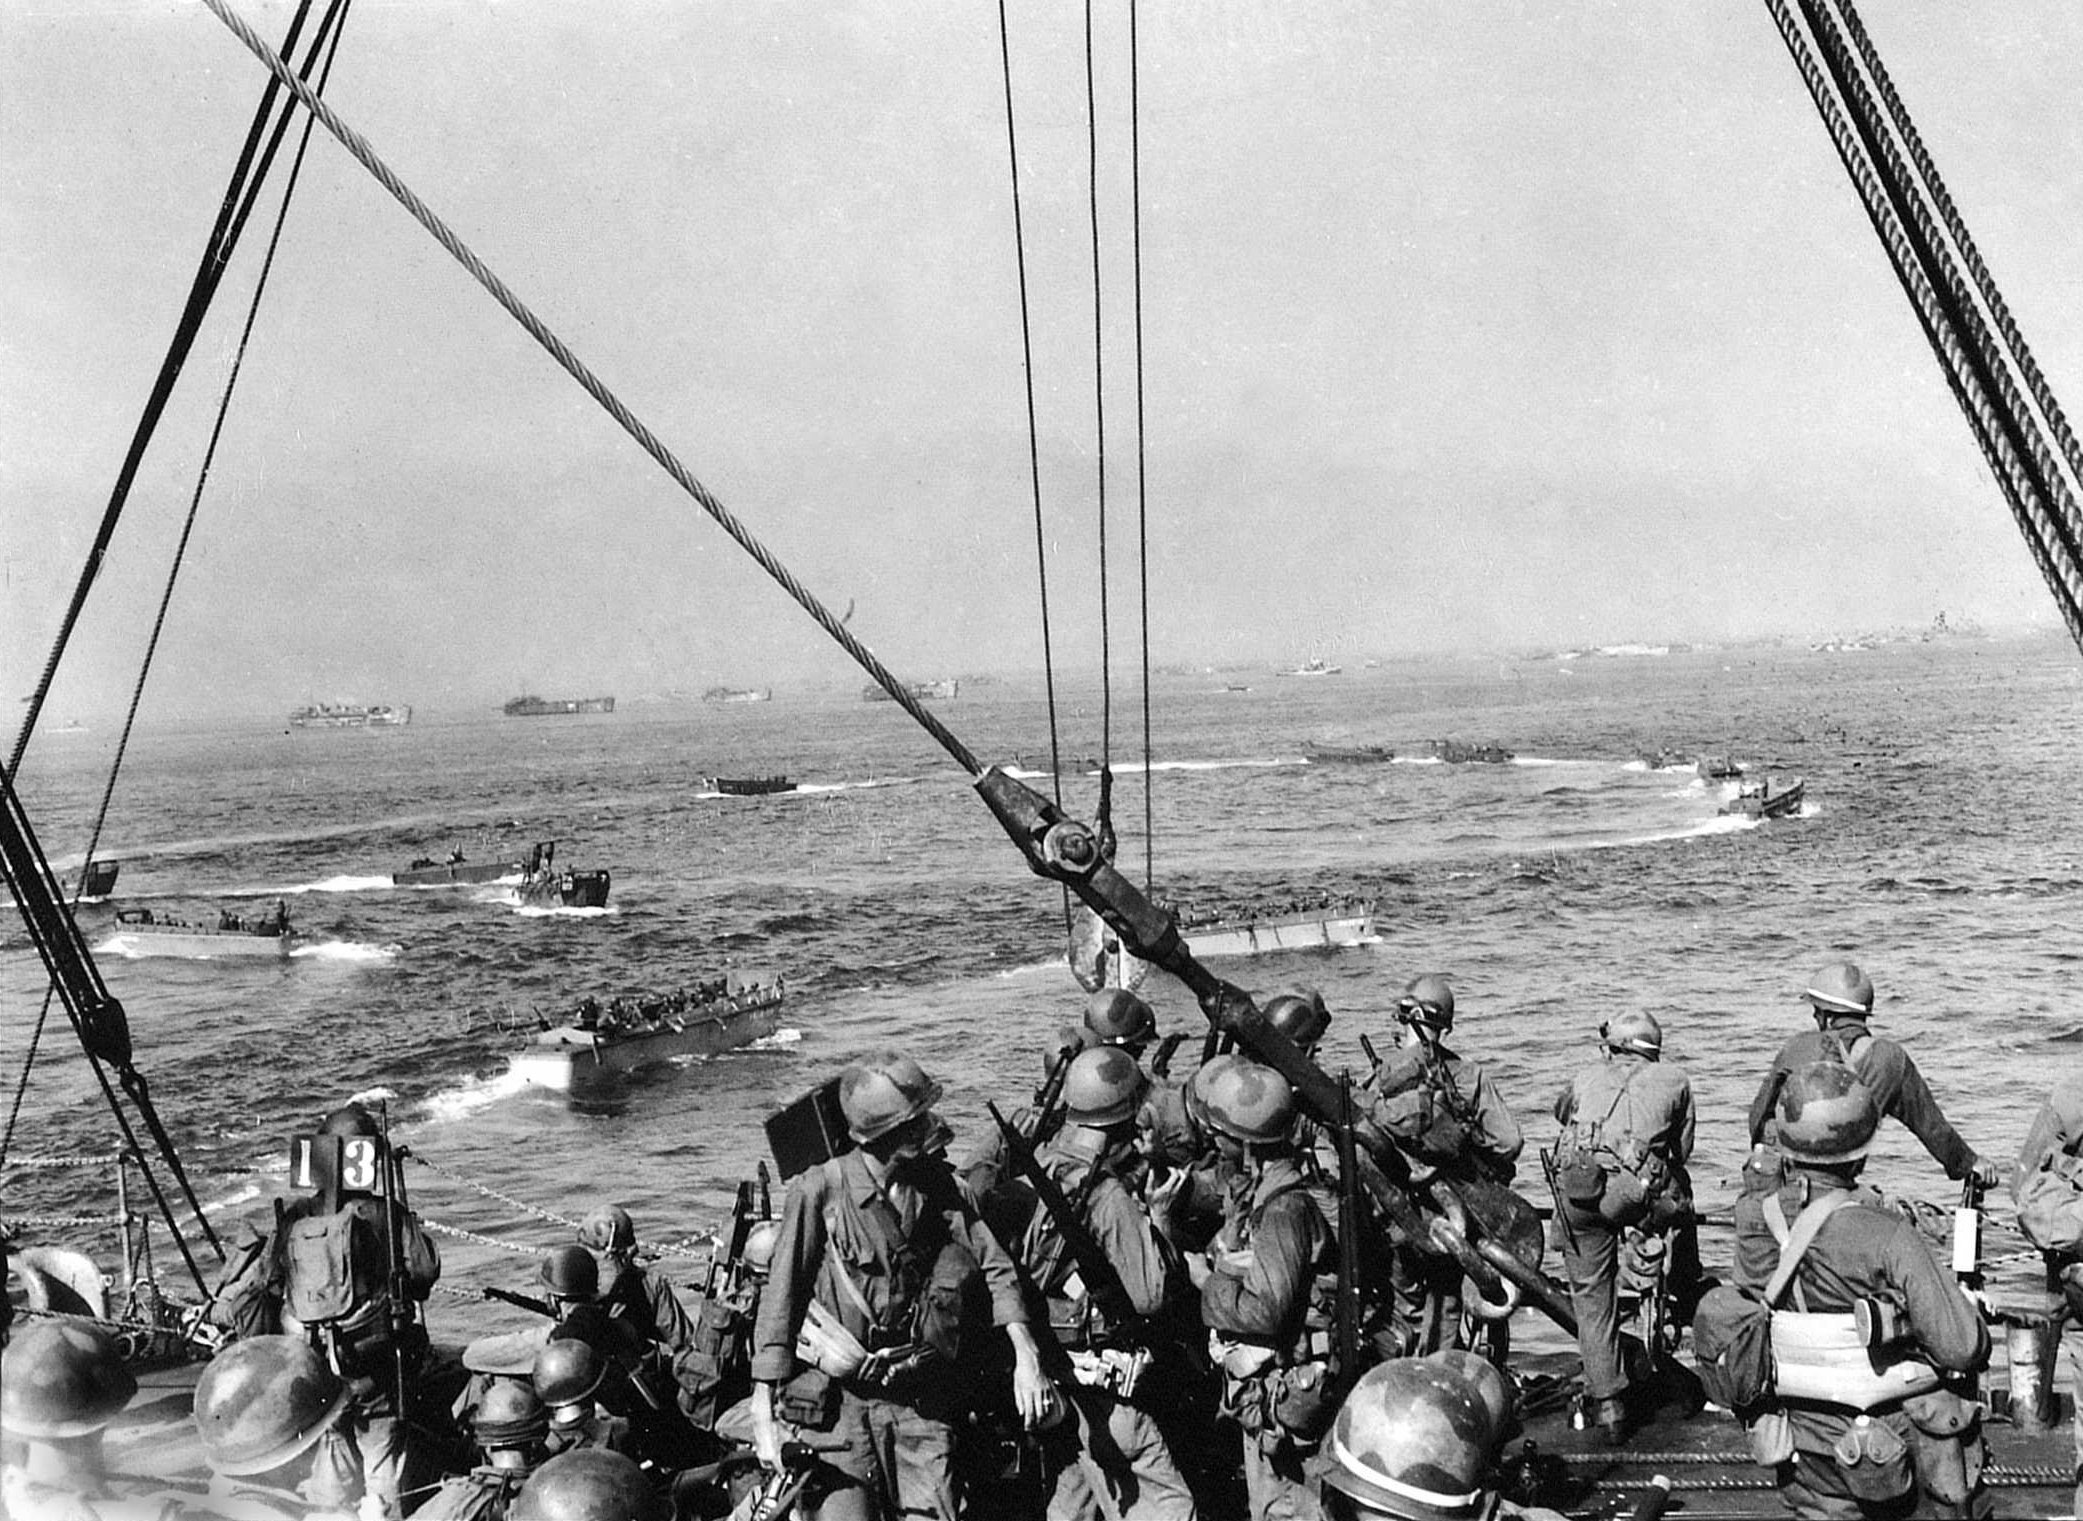 United States Army troops of the 19th Infantry Regiment, 3rd Battalion disembarking the USS Elmore bound for the landing beaches at Leyte, Philippines, 20 Oct 1944.